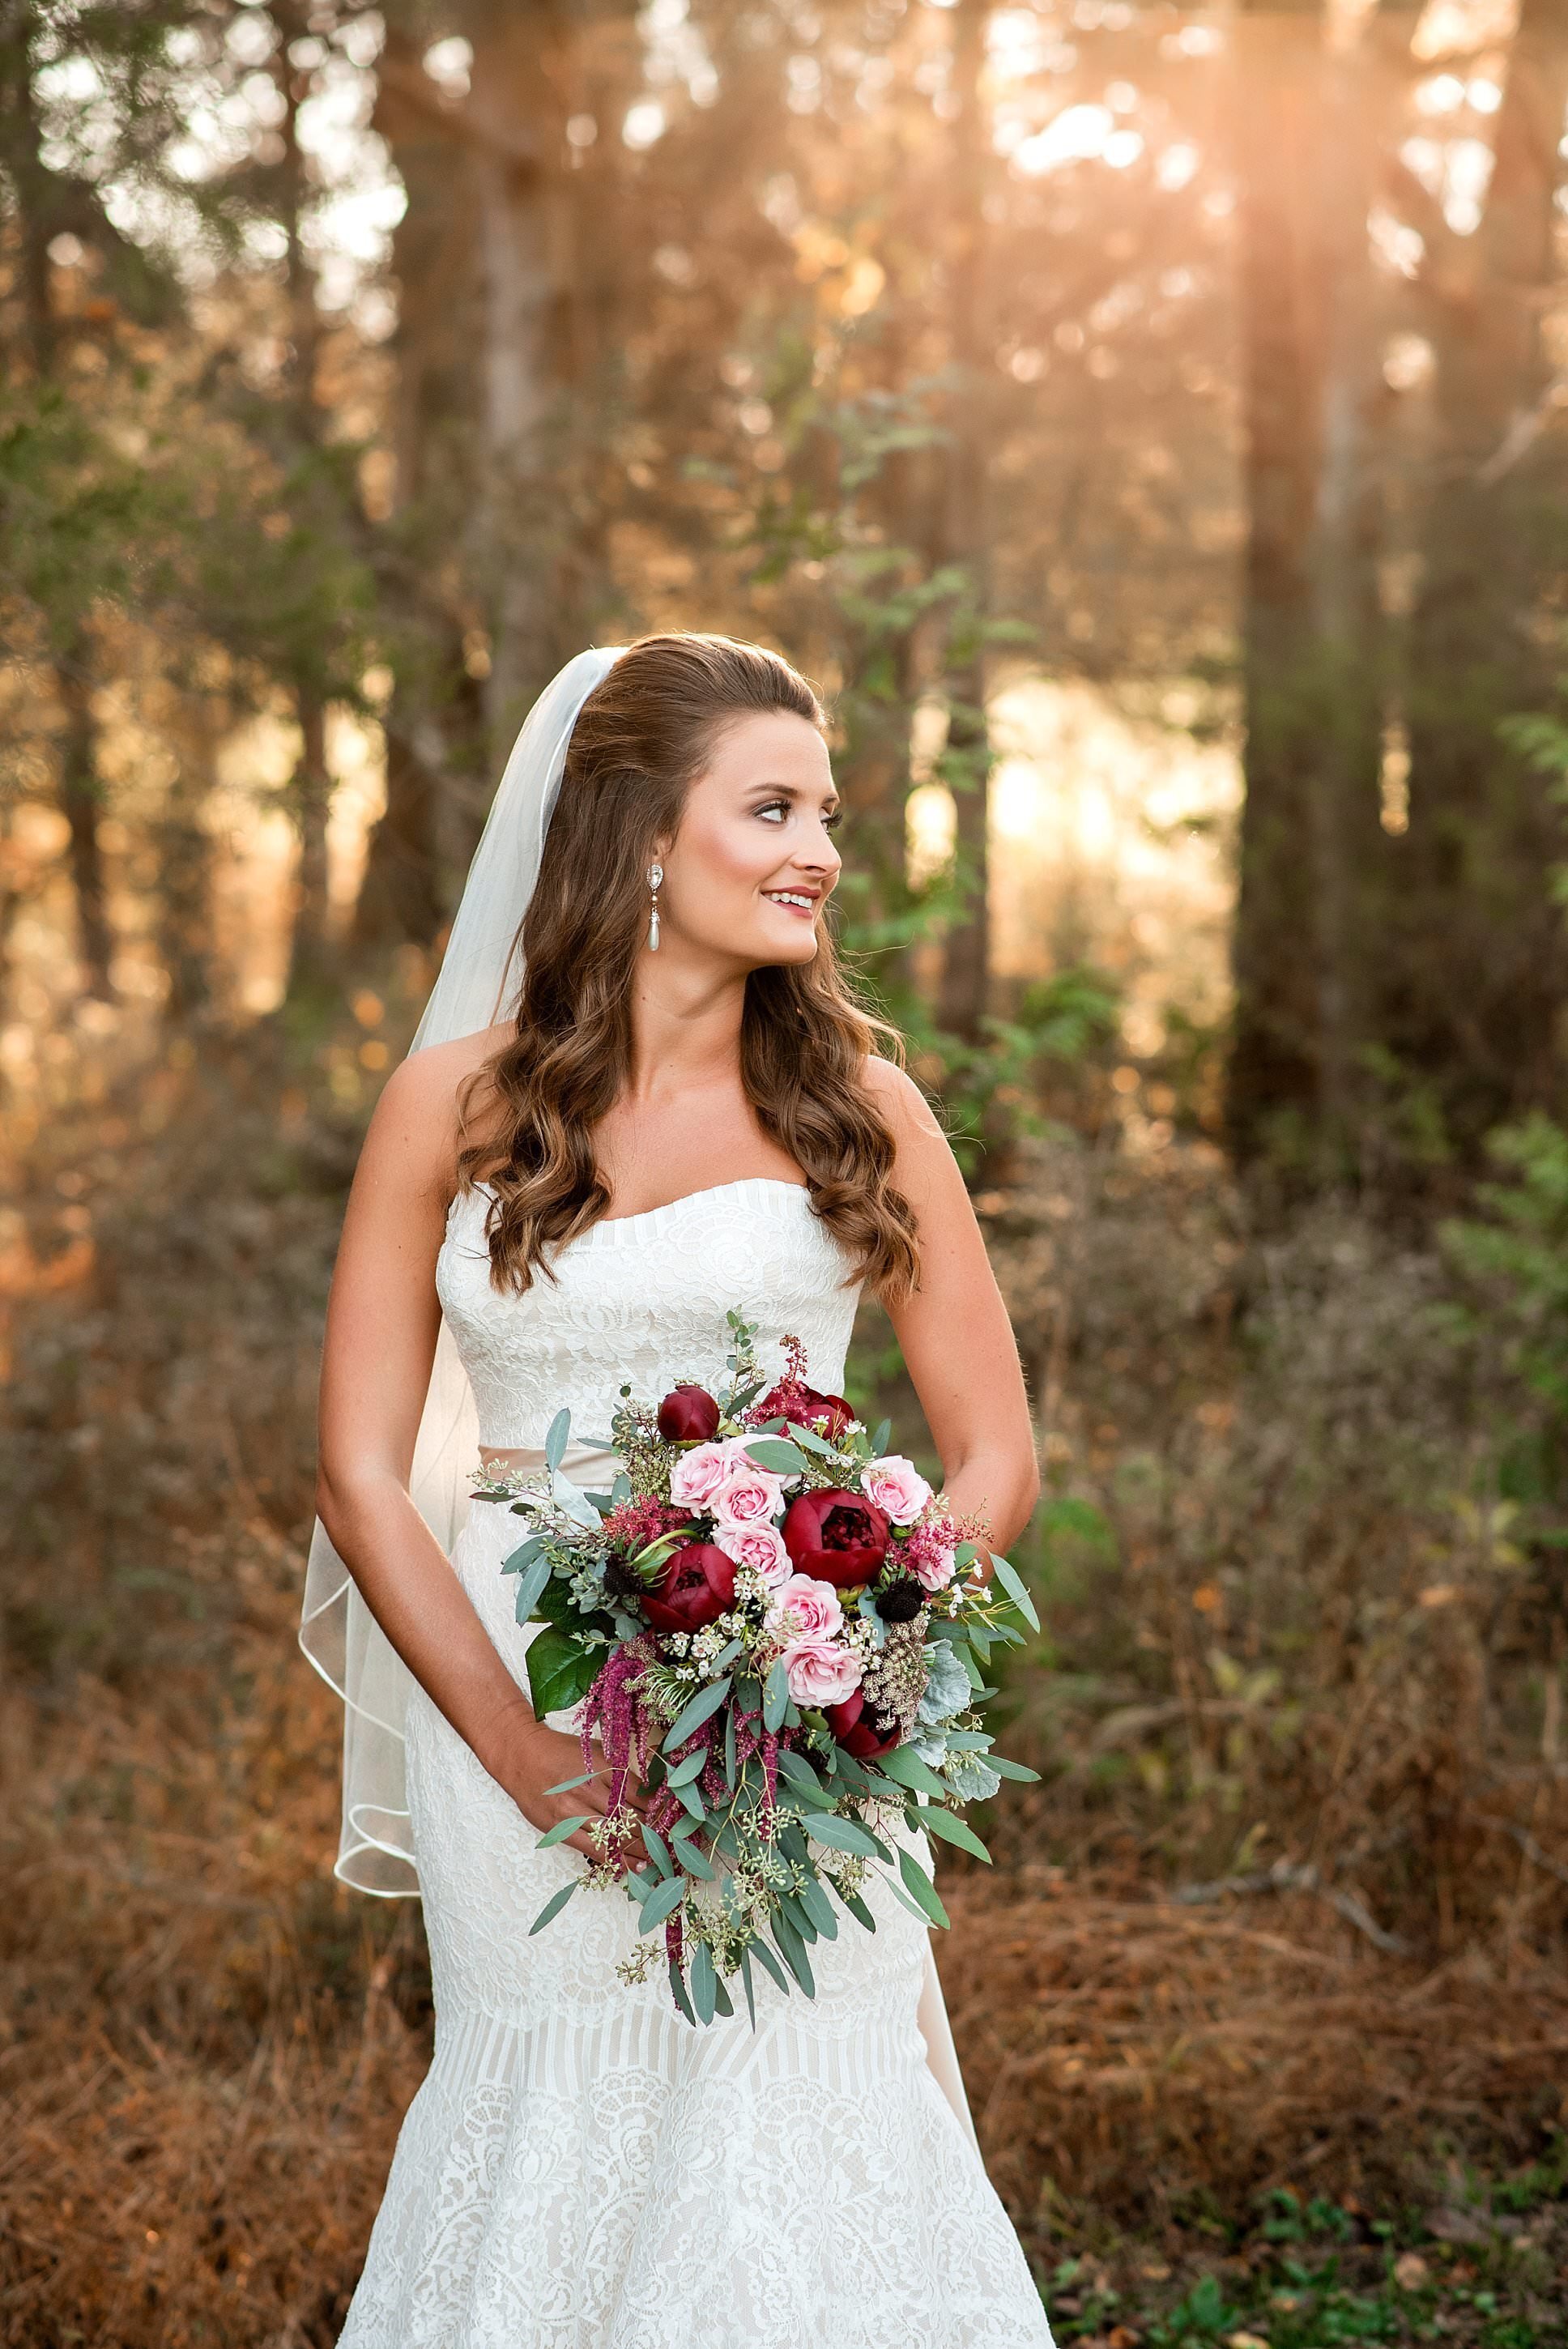 Bridal Portraits in the forest at Grace Valley Farm during golden hour wearing a sweetheart dress and holding a pink and burgundy bouquet